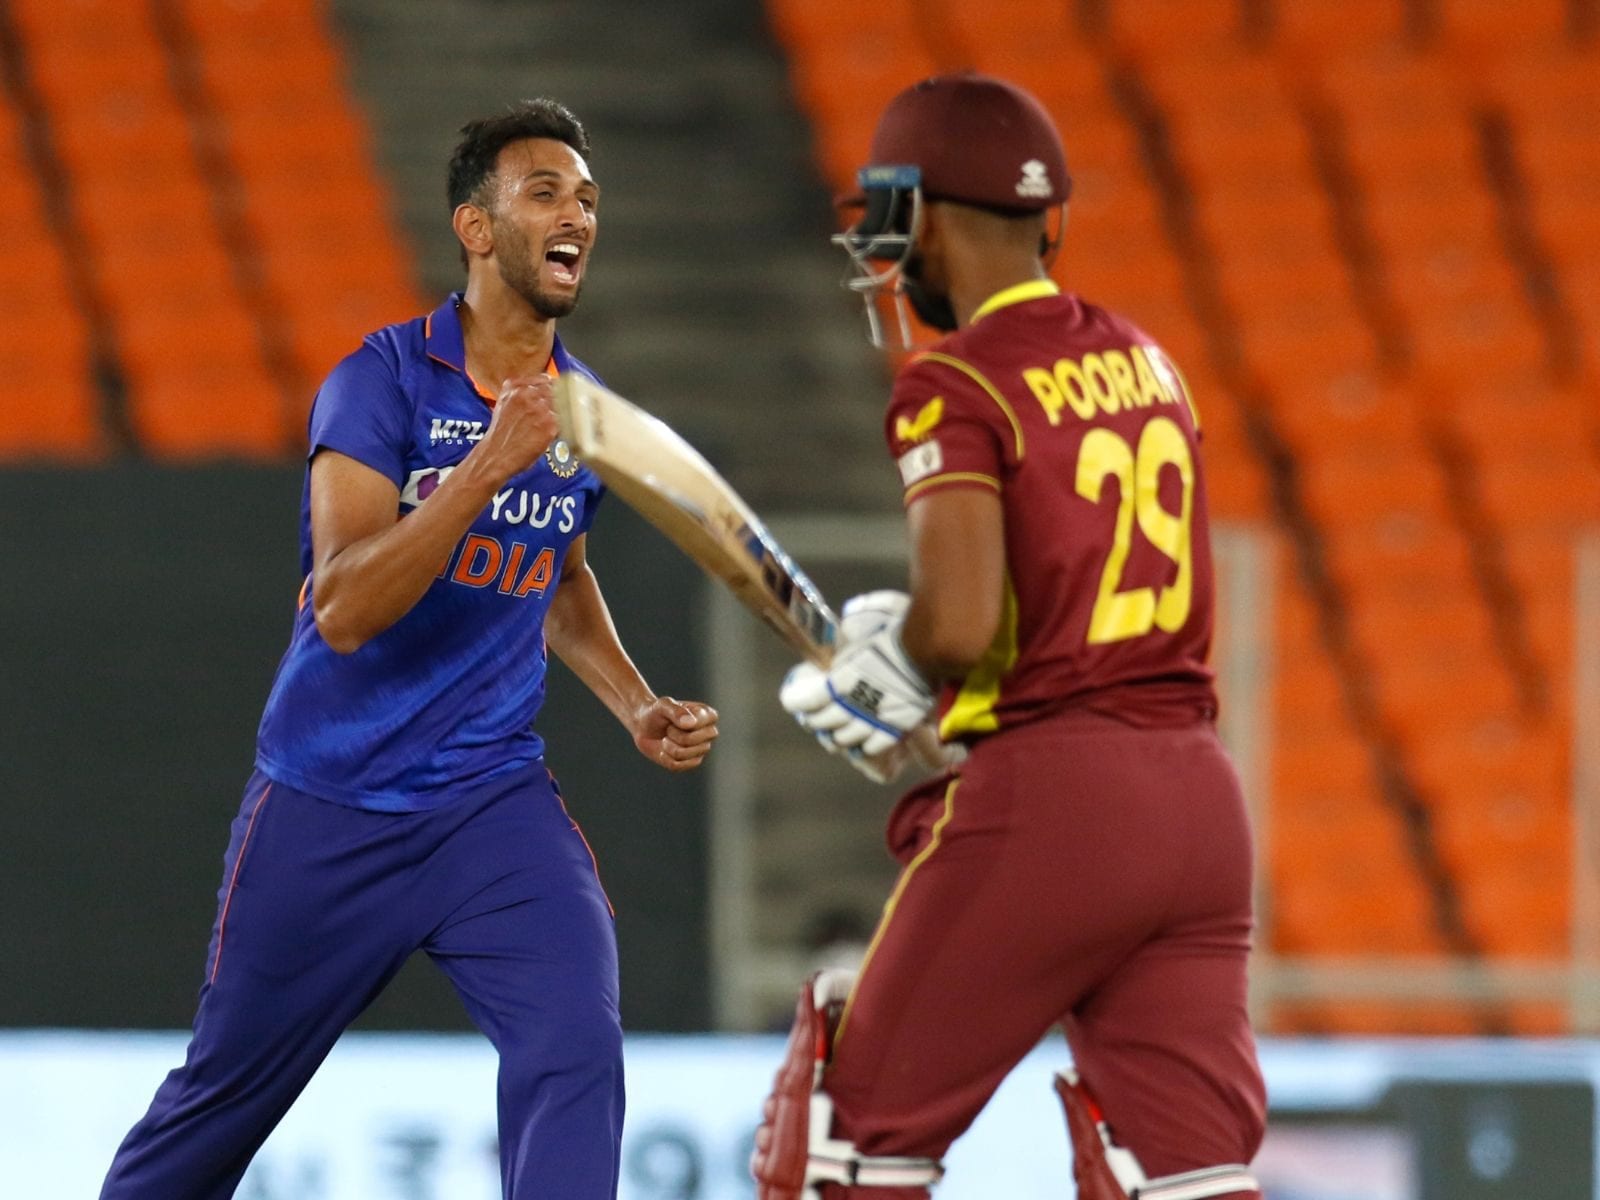 IND vs WI, 1st ODI Live Streaming When And Where To Watch India vs West Indies Live Coverage on TV and Online